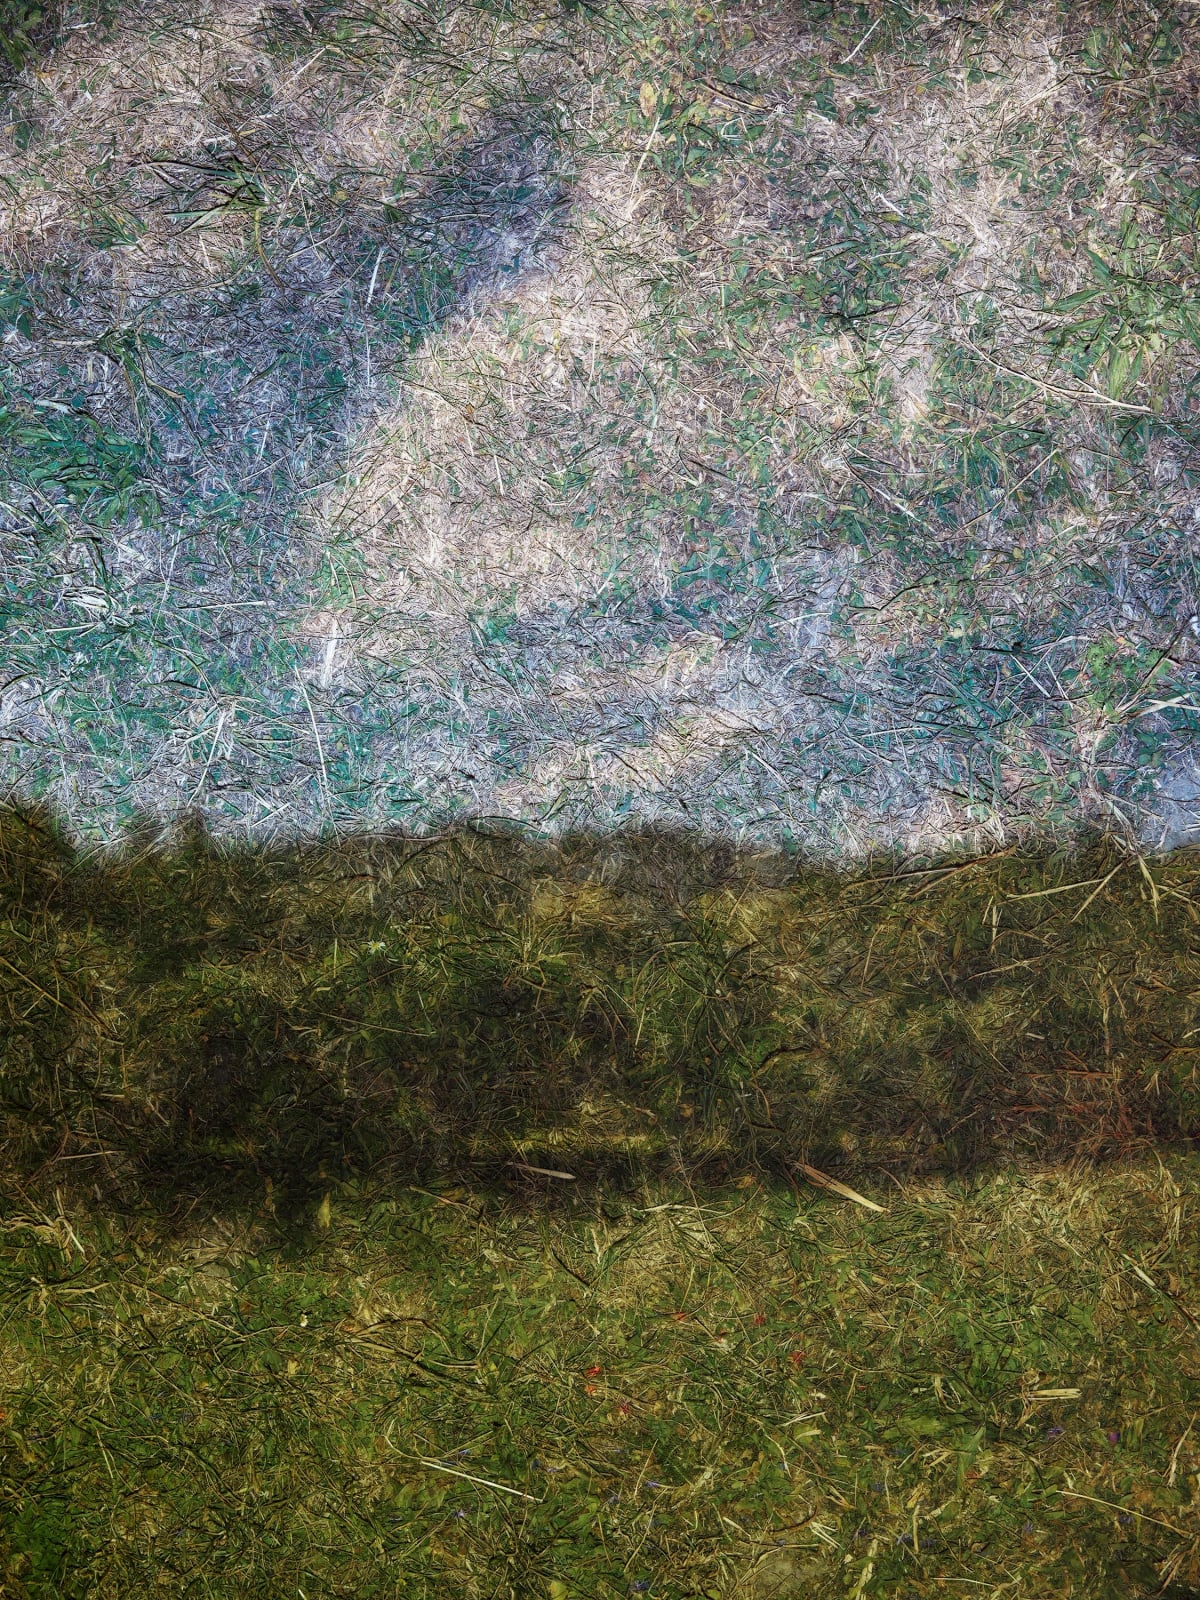 Abelardo Morell, Tent-Camera Image on Ground: Field and Clouds, Giverny, France, 2023